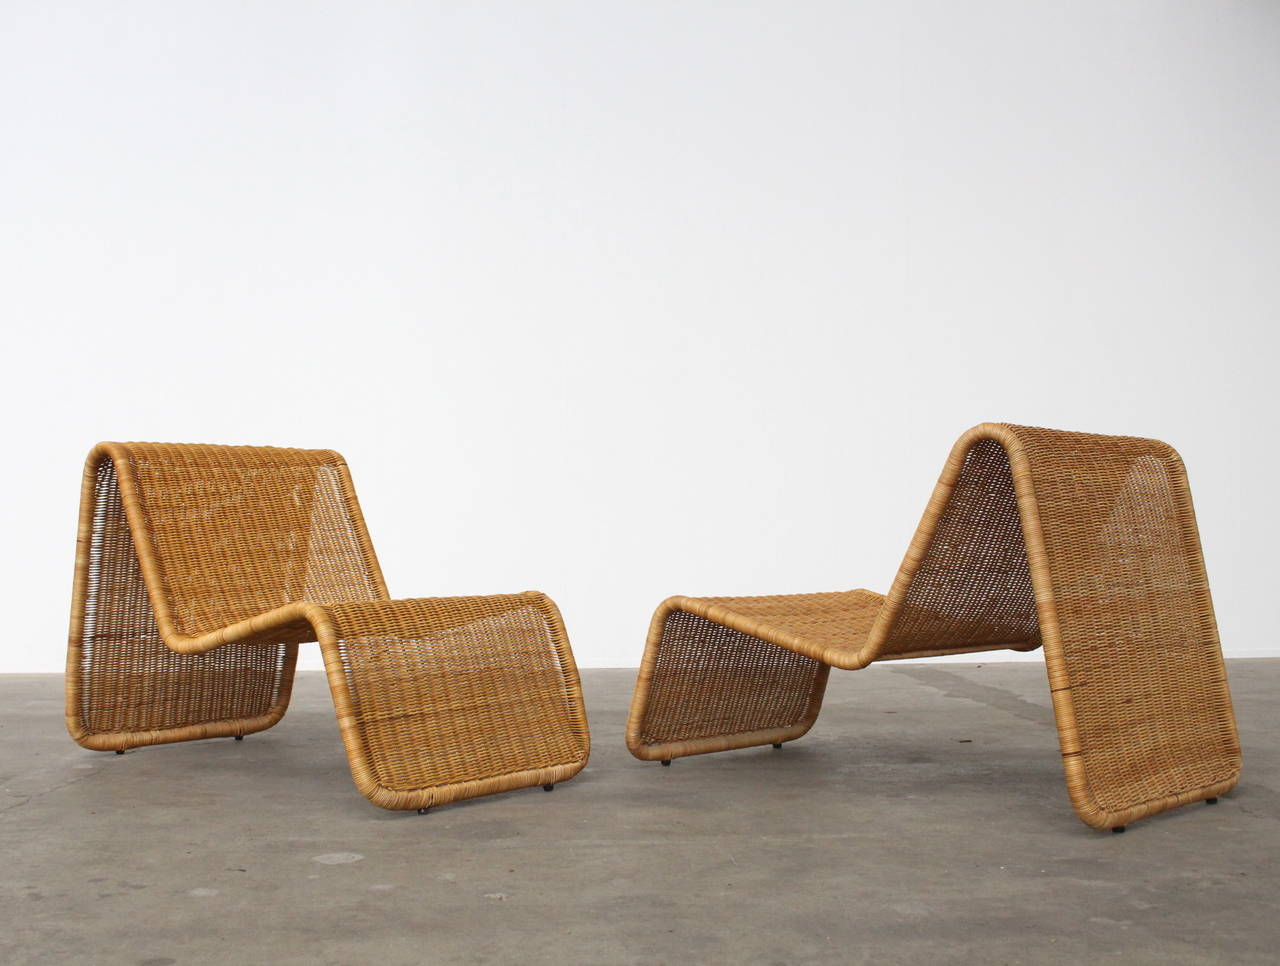 For all items from this dealer please hit the button VIEW ALL FROM SELLER below on this page

Wonderful pair of sculptural lounge chairs designed by Tito Agnoli for Bonacina. Tubular lacquered steel frame with woven wicker. This model can be used